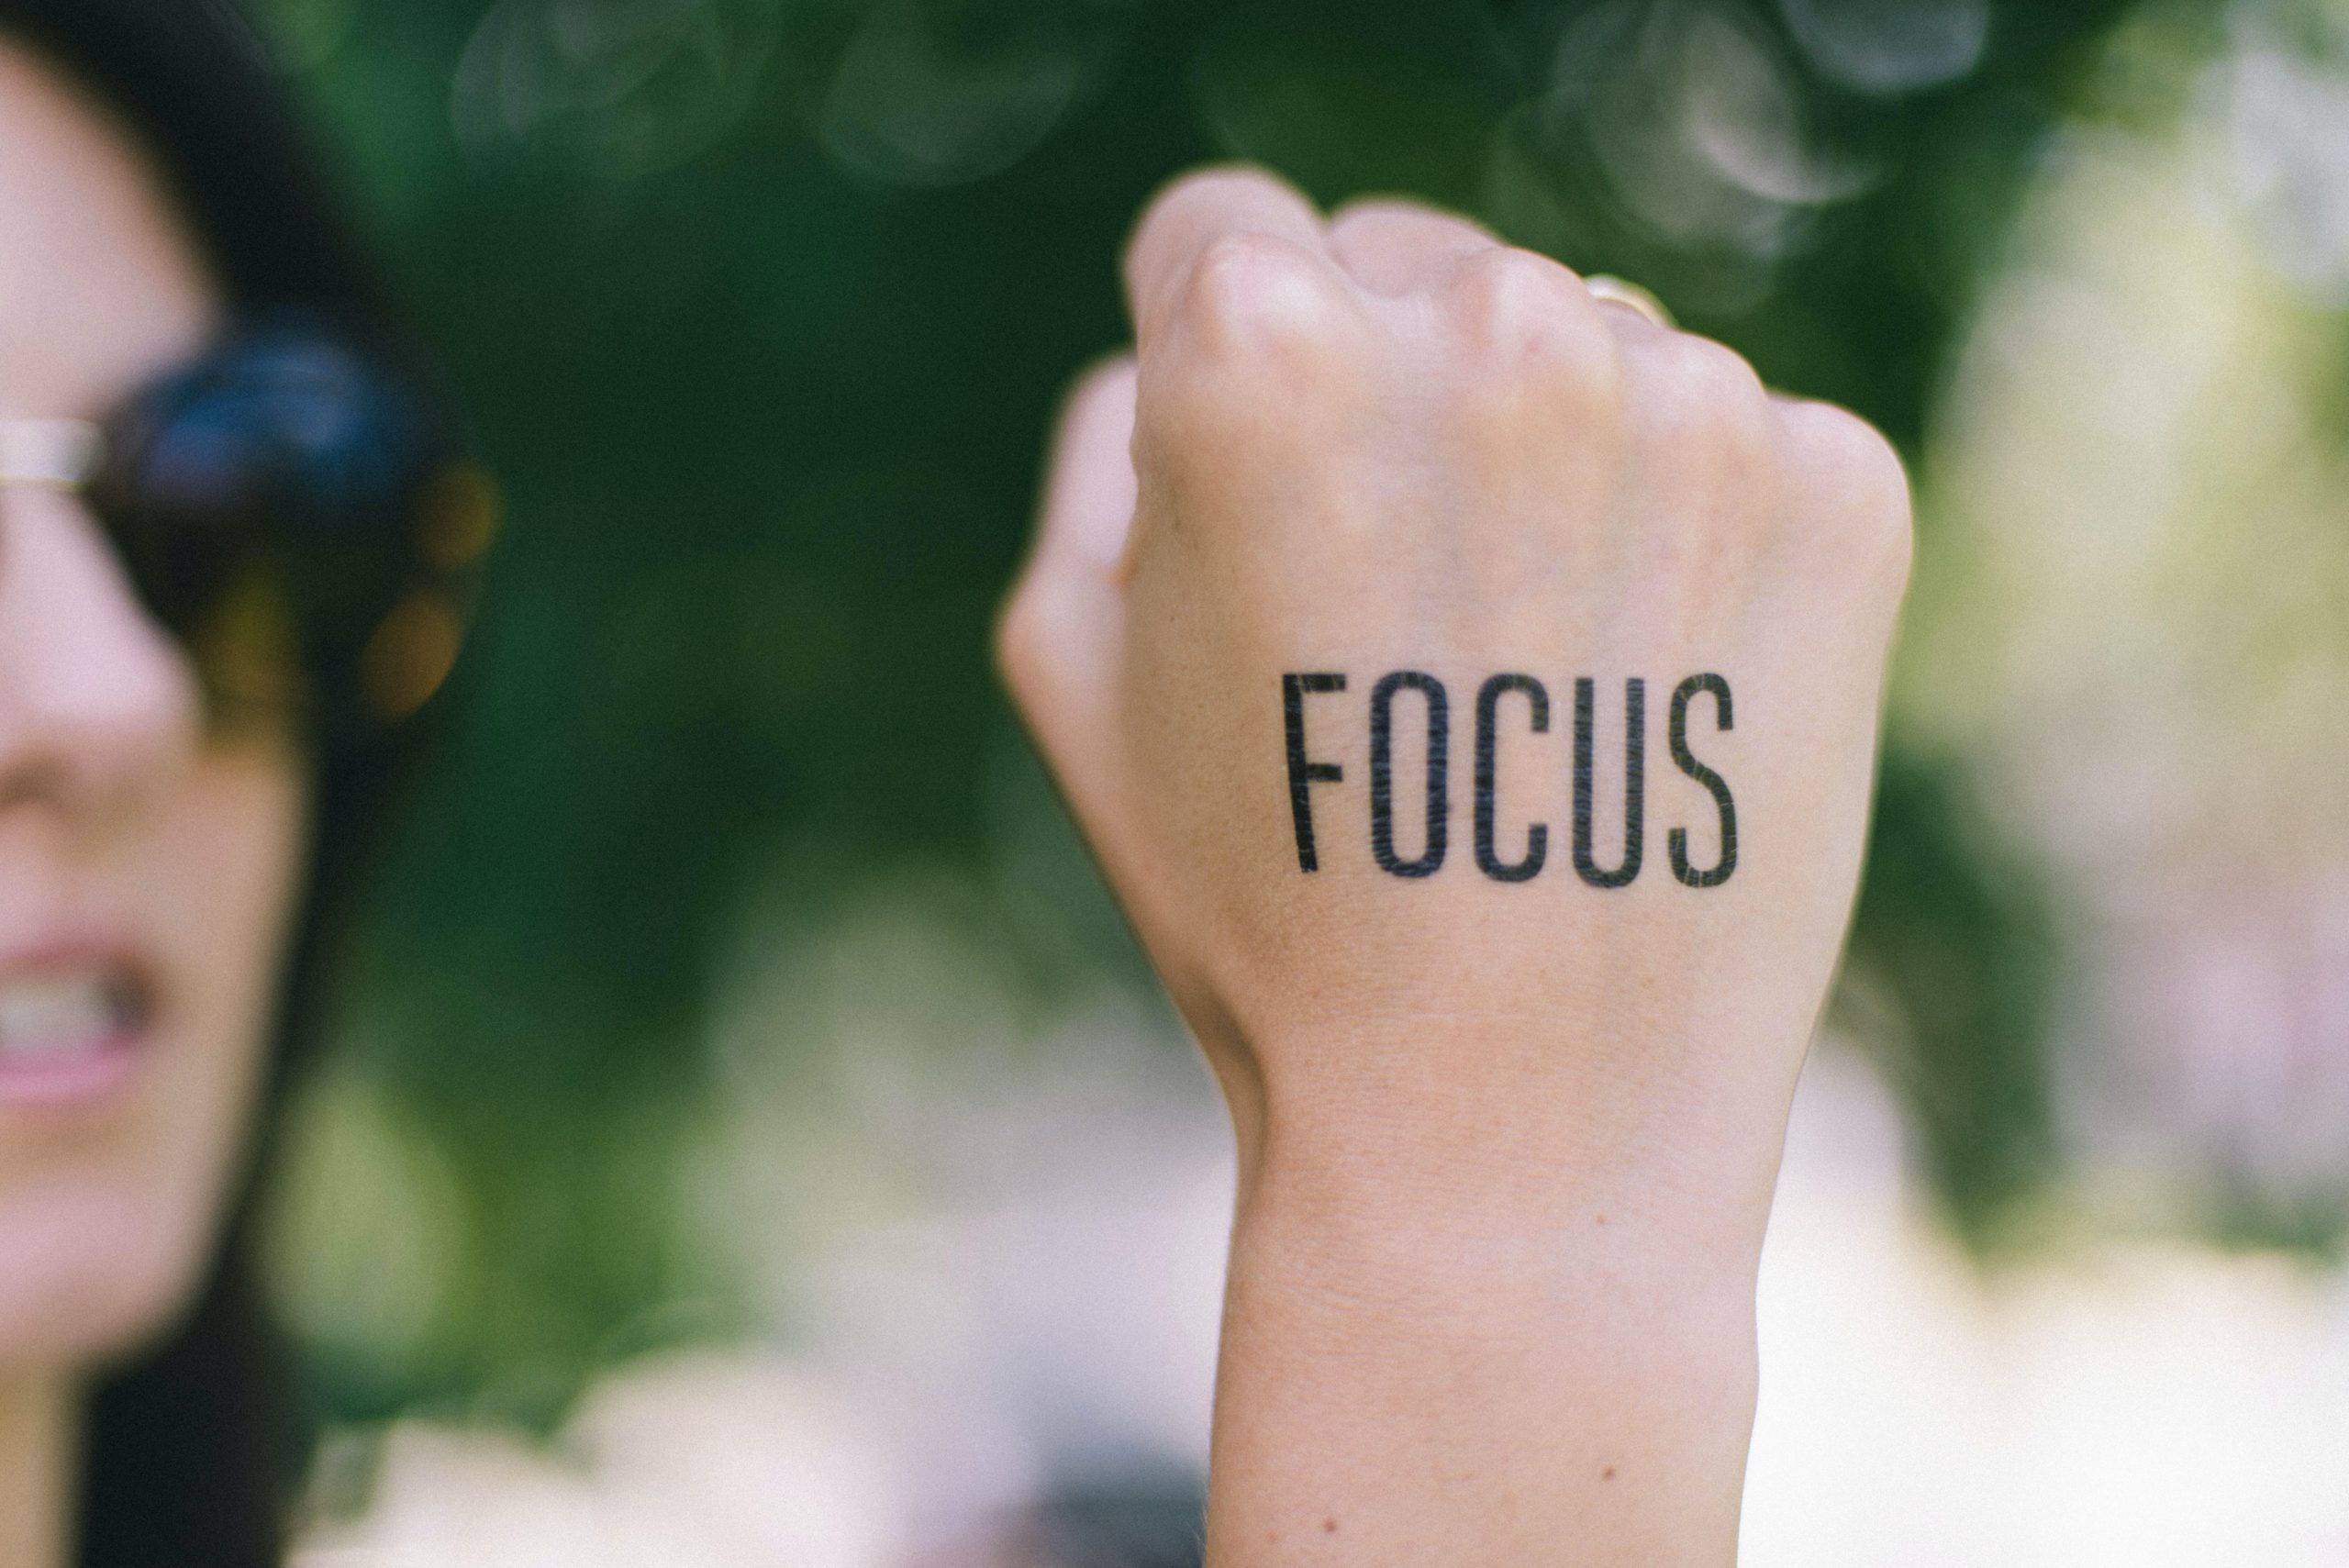  Don’t Wait for Inspiration: The Power of Focus, Discipline, and Understanding Your “Why”